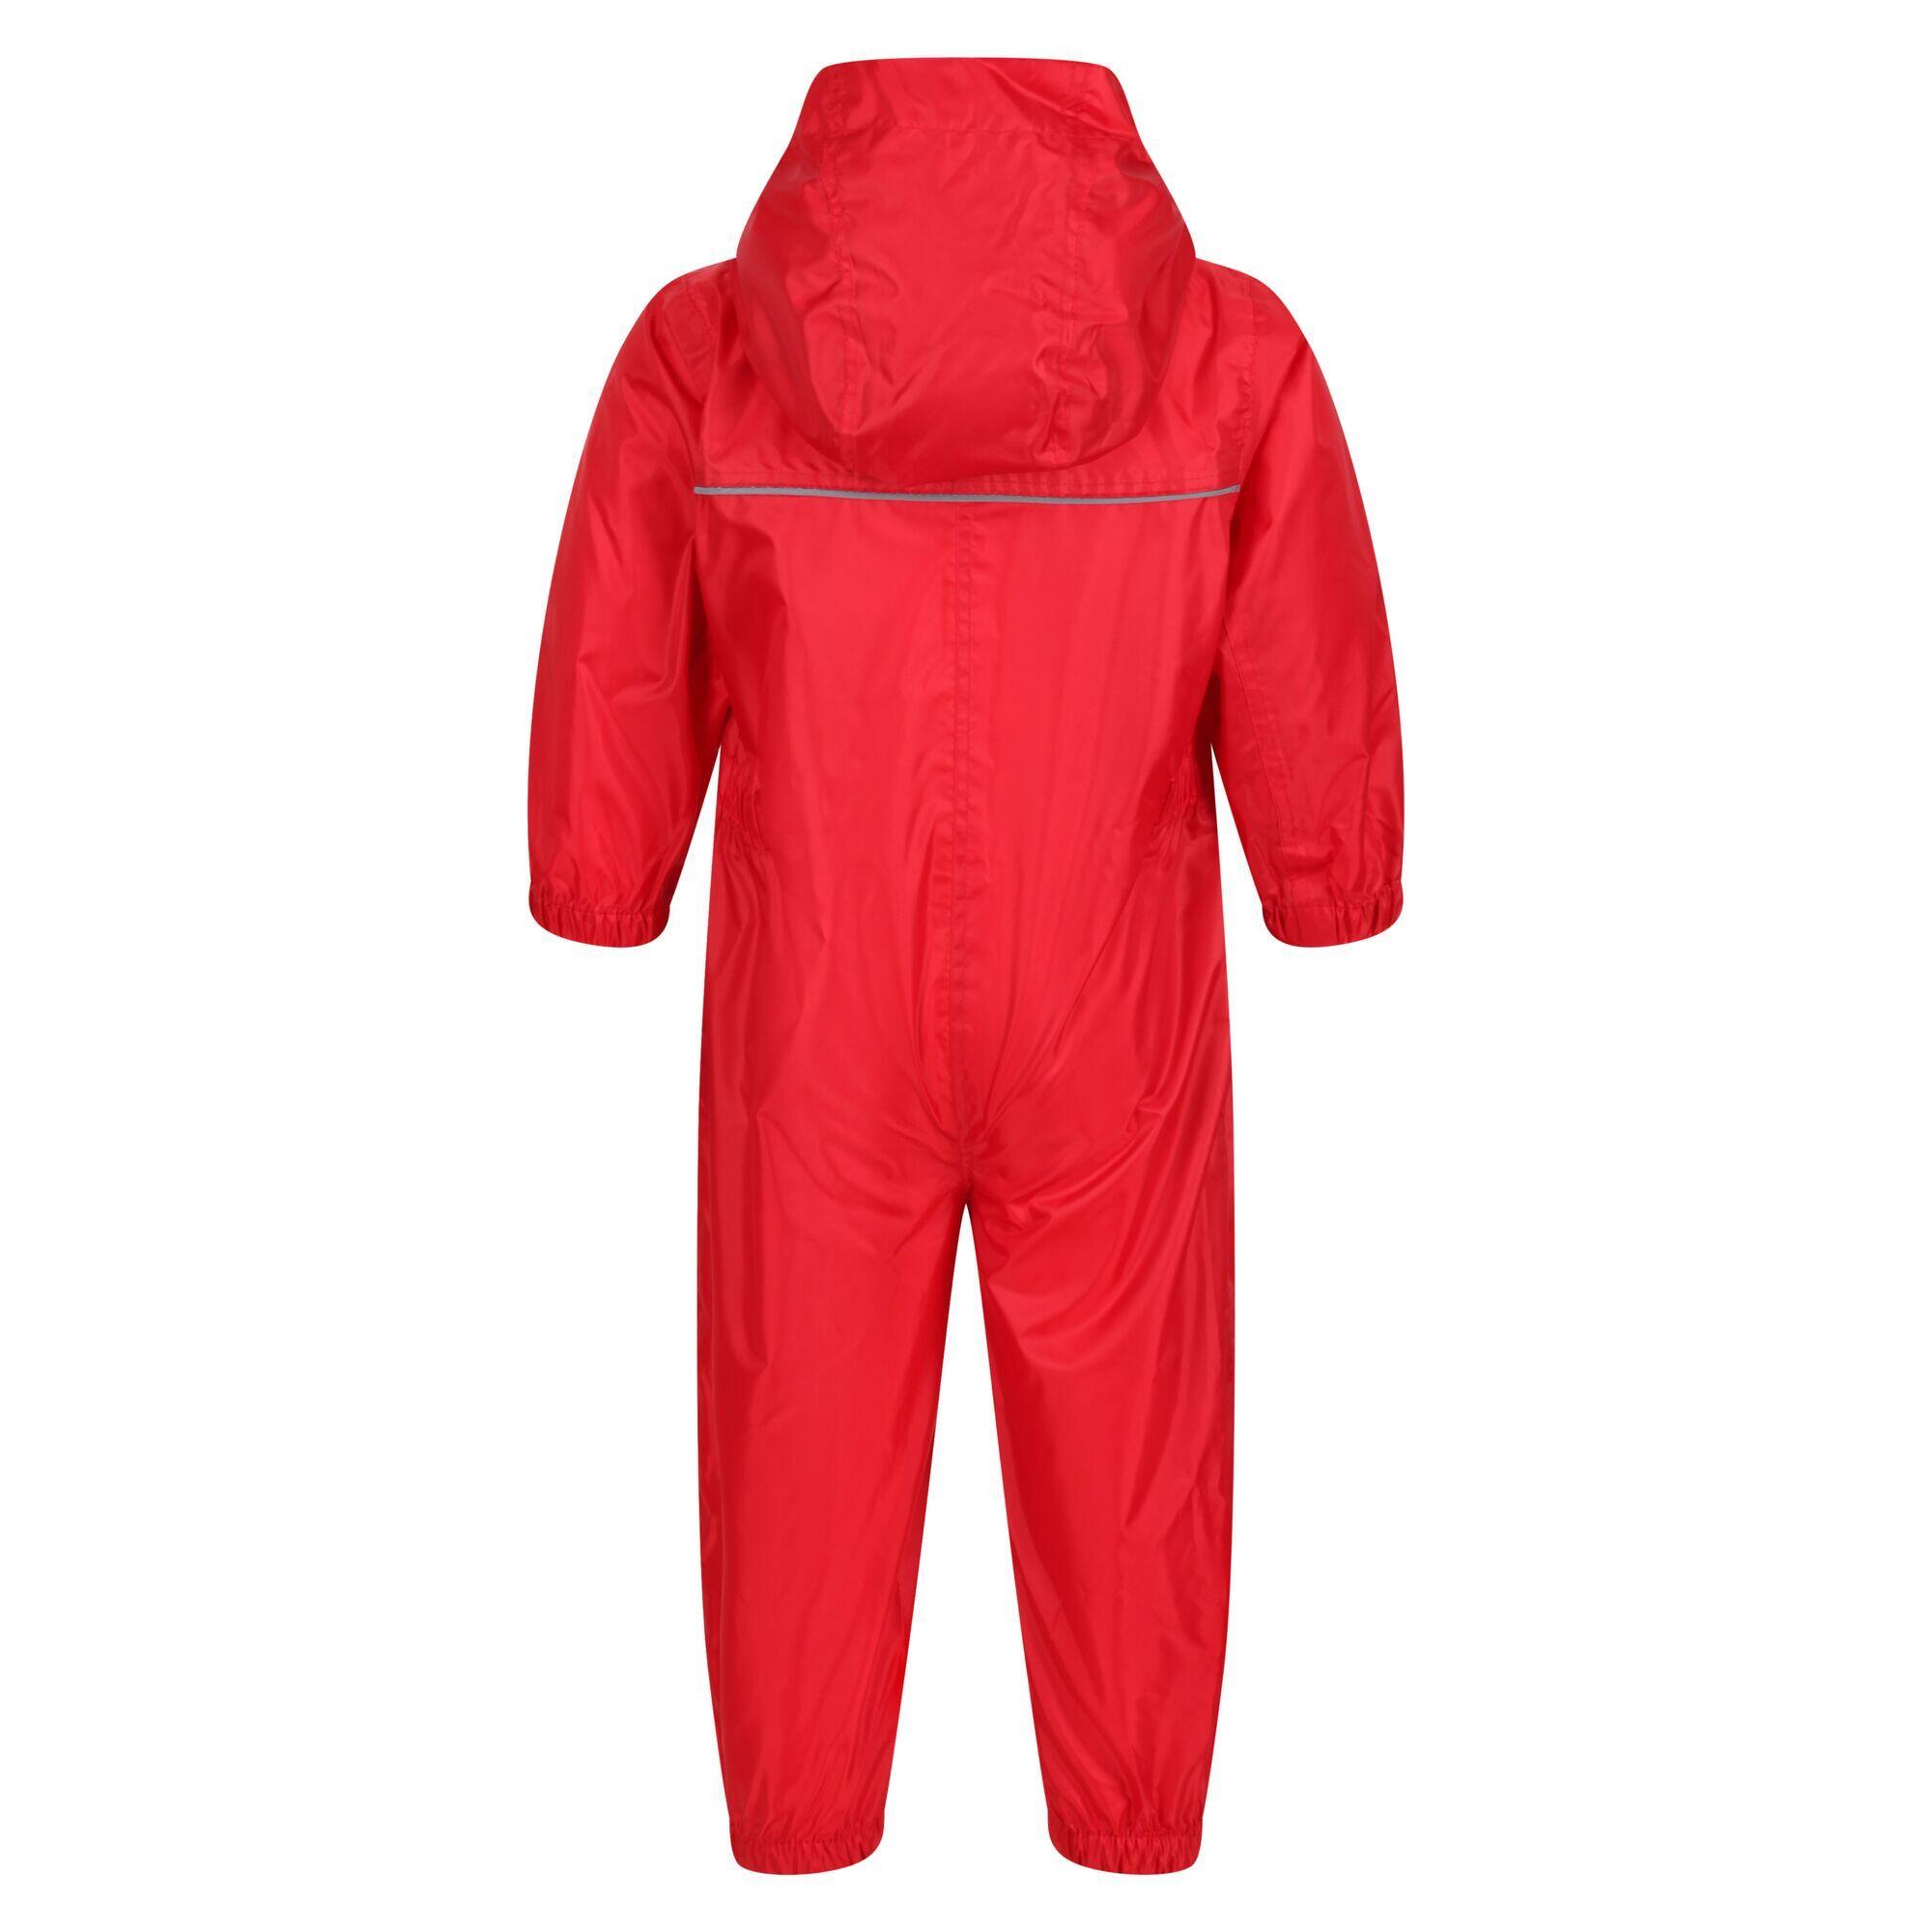 Professional Baby/Kids Paddle All In One Rain Suit (Classic Red) 2/4